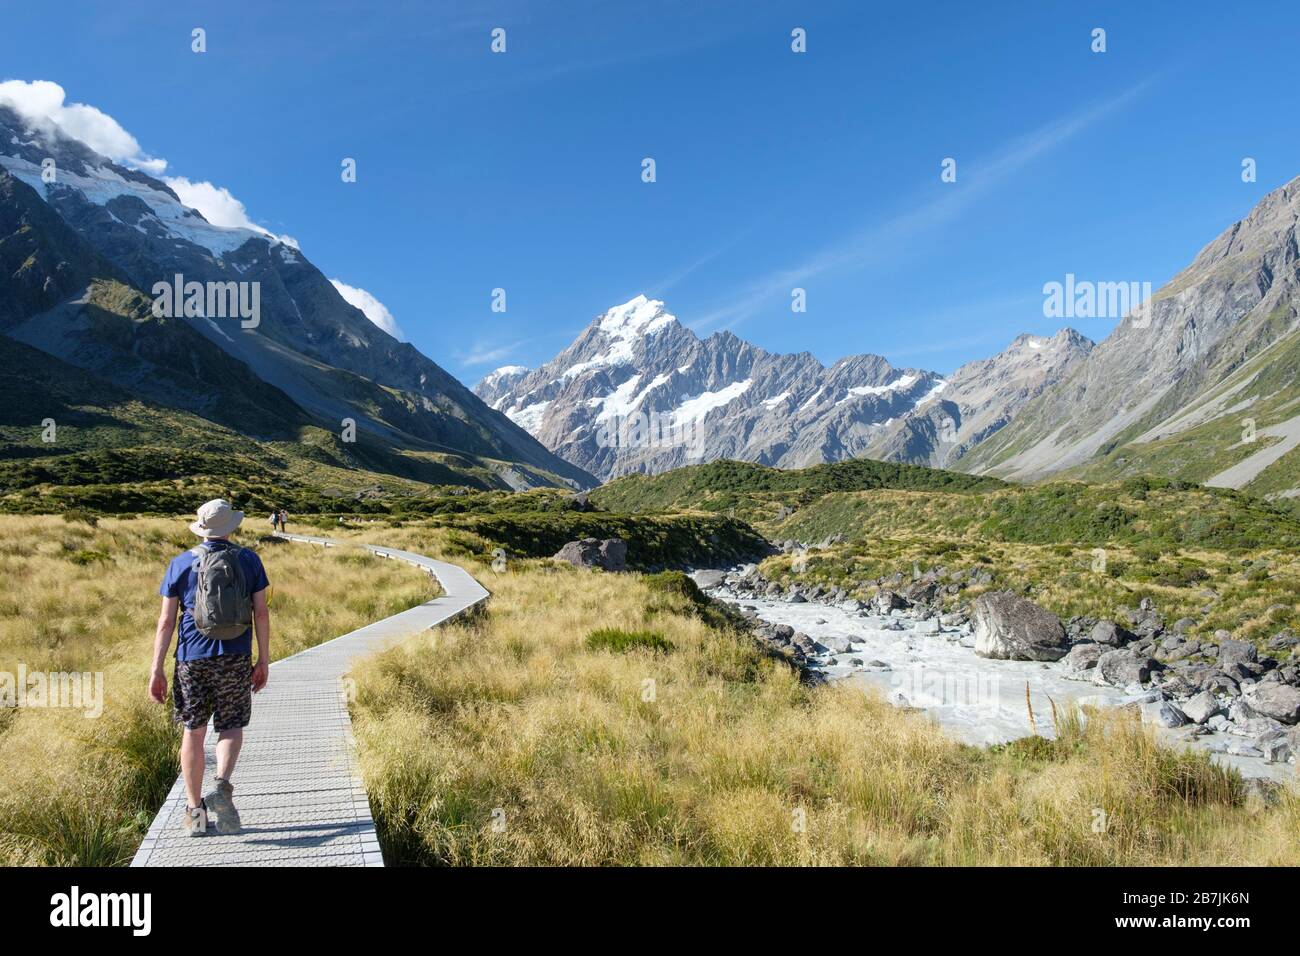 Man on trail with Glaciers and snow-topped mountain, Hooker Track, Aoraki/Mount Cook National Park, South Island, New Zealand Stock Photo